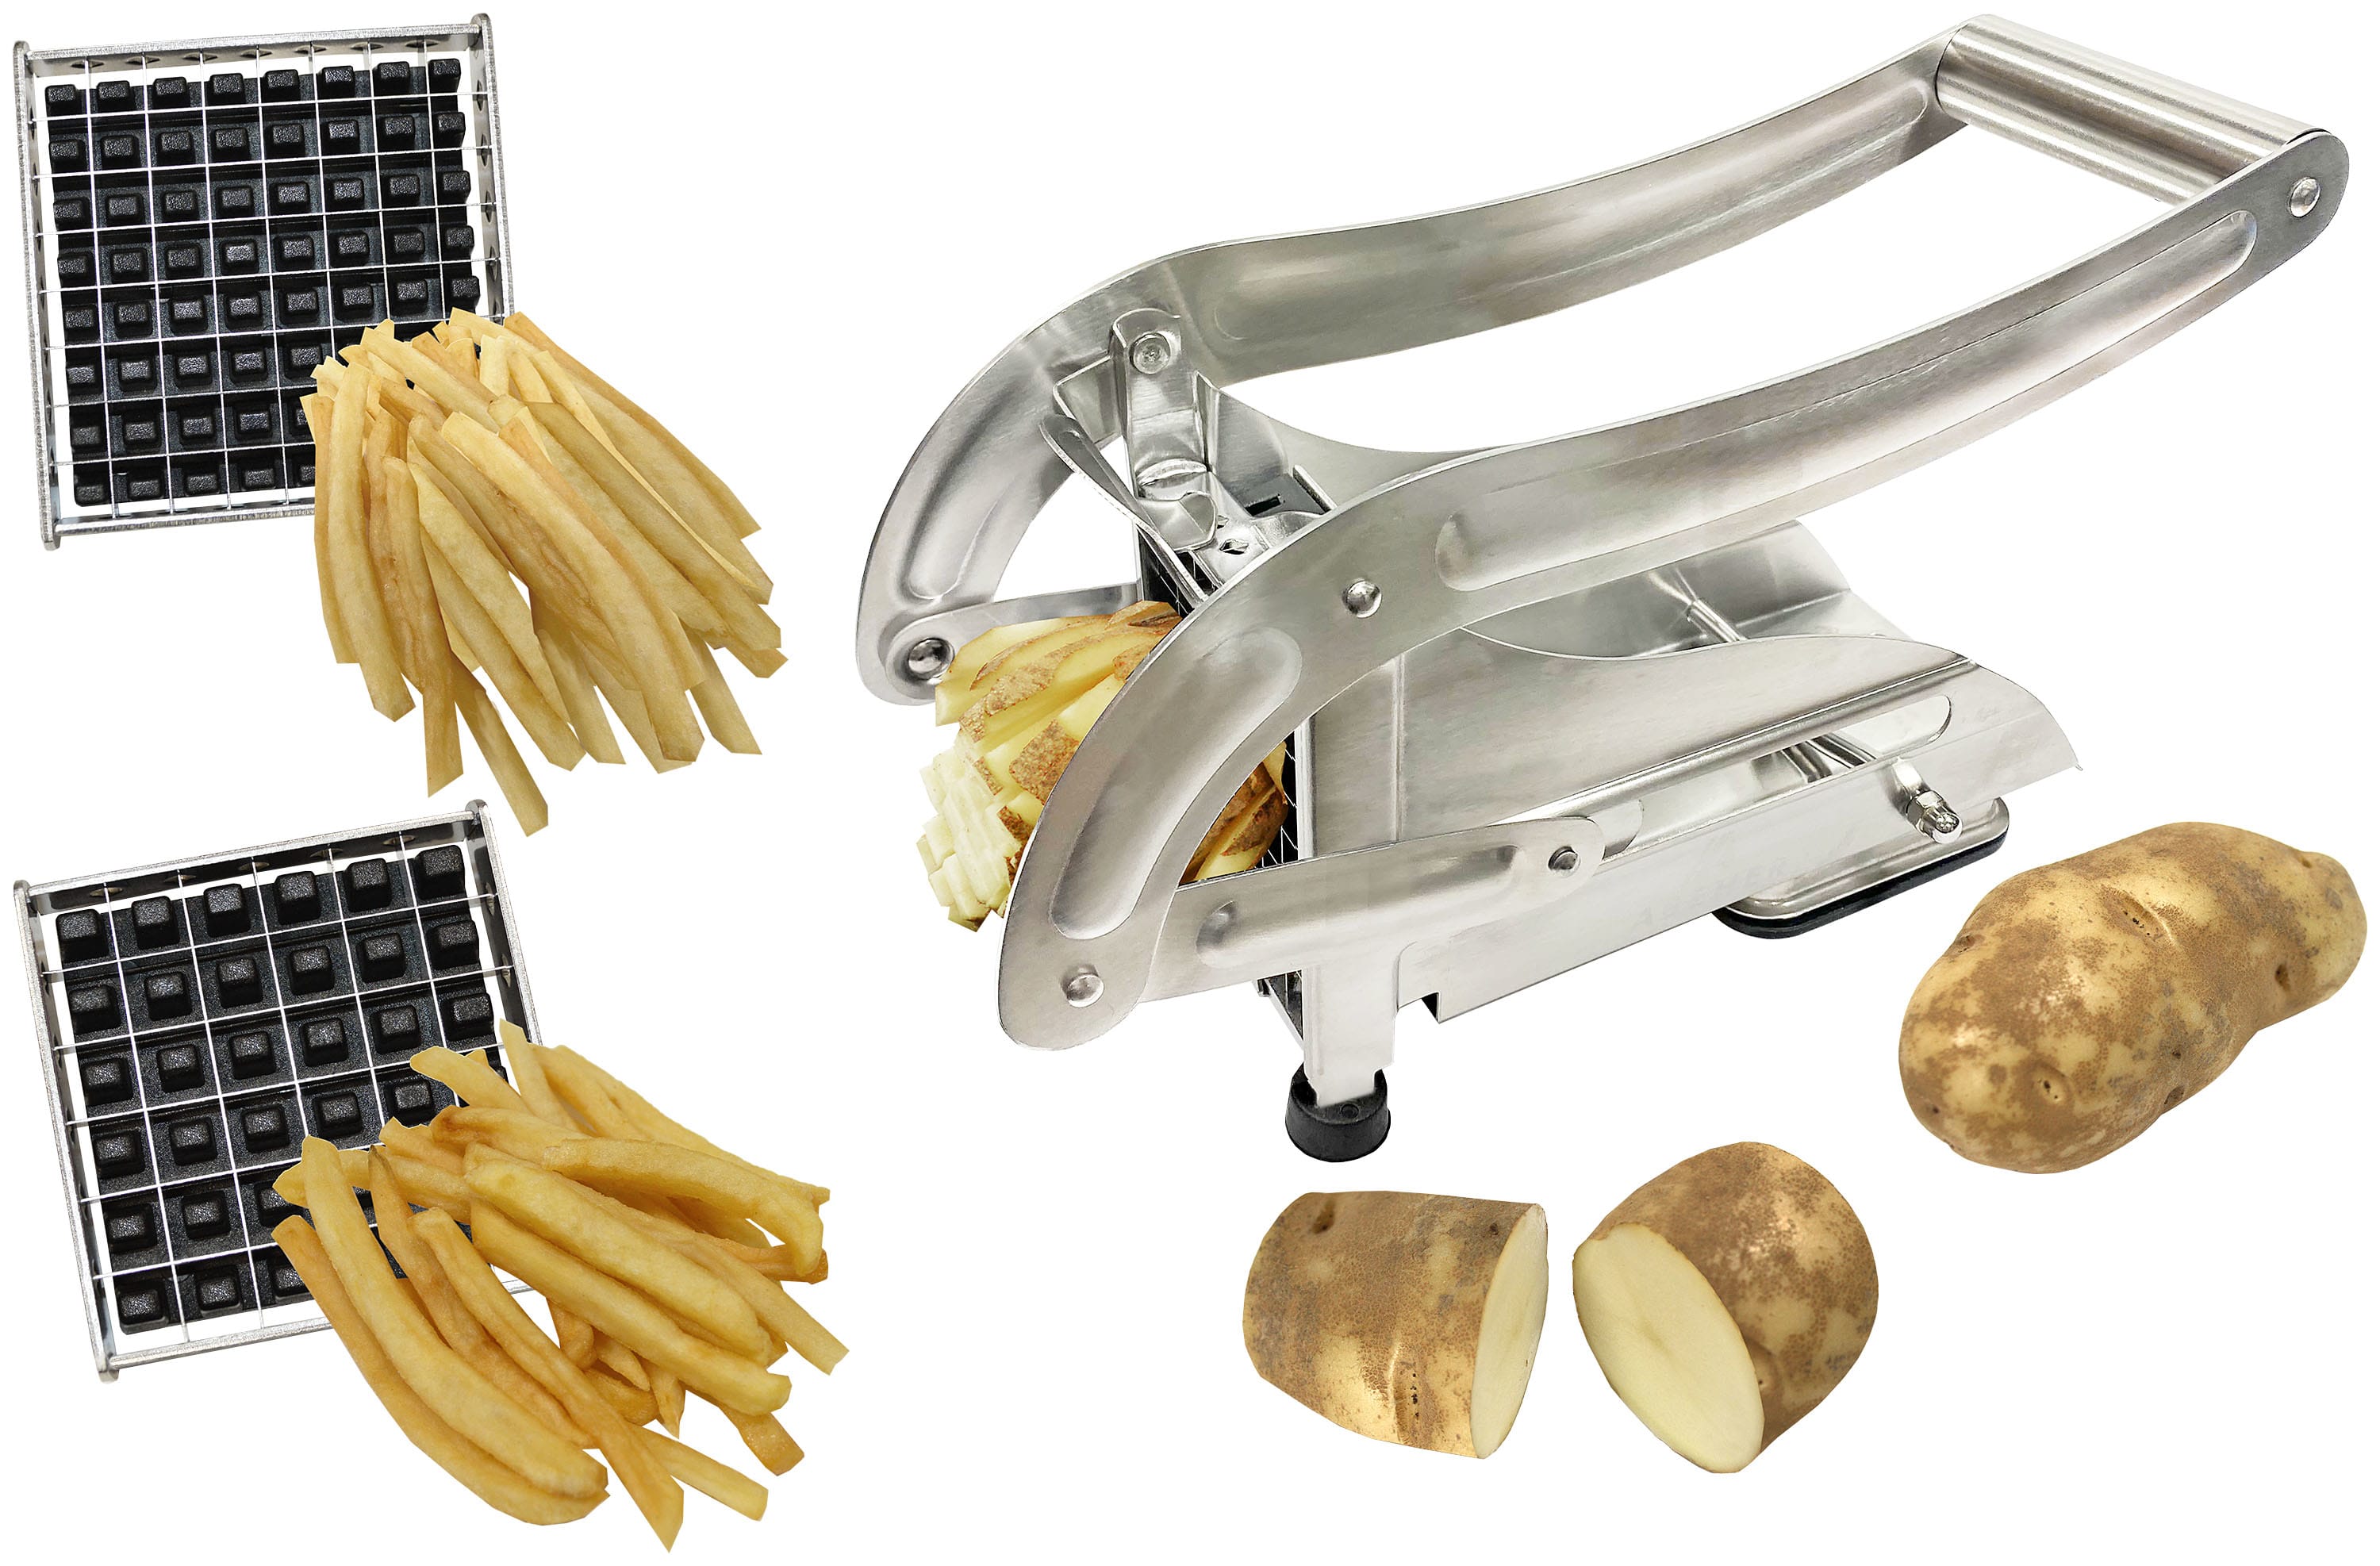 Foremost Brand Fry Cutter